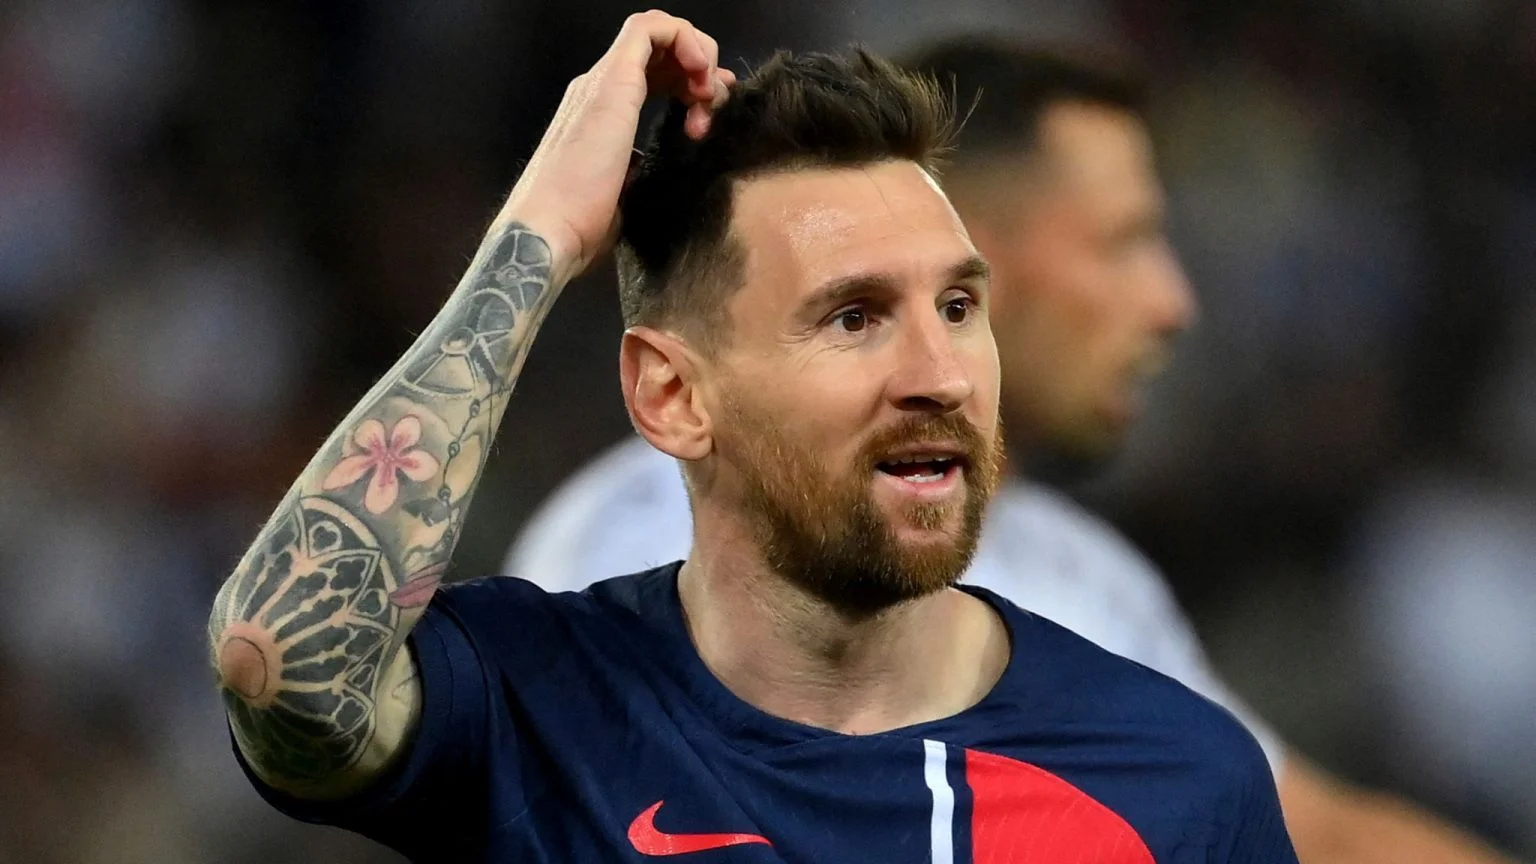 Ballon d’Or organizers claim Messi not yet record holder ahead of 2023 award